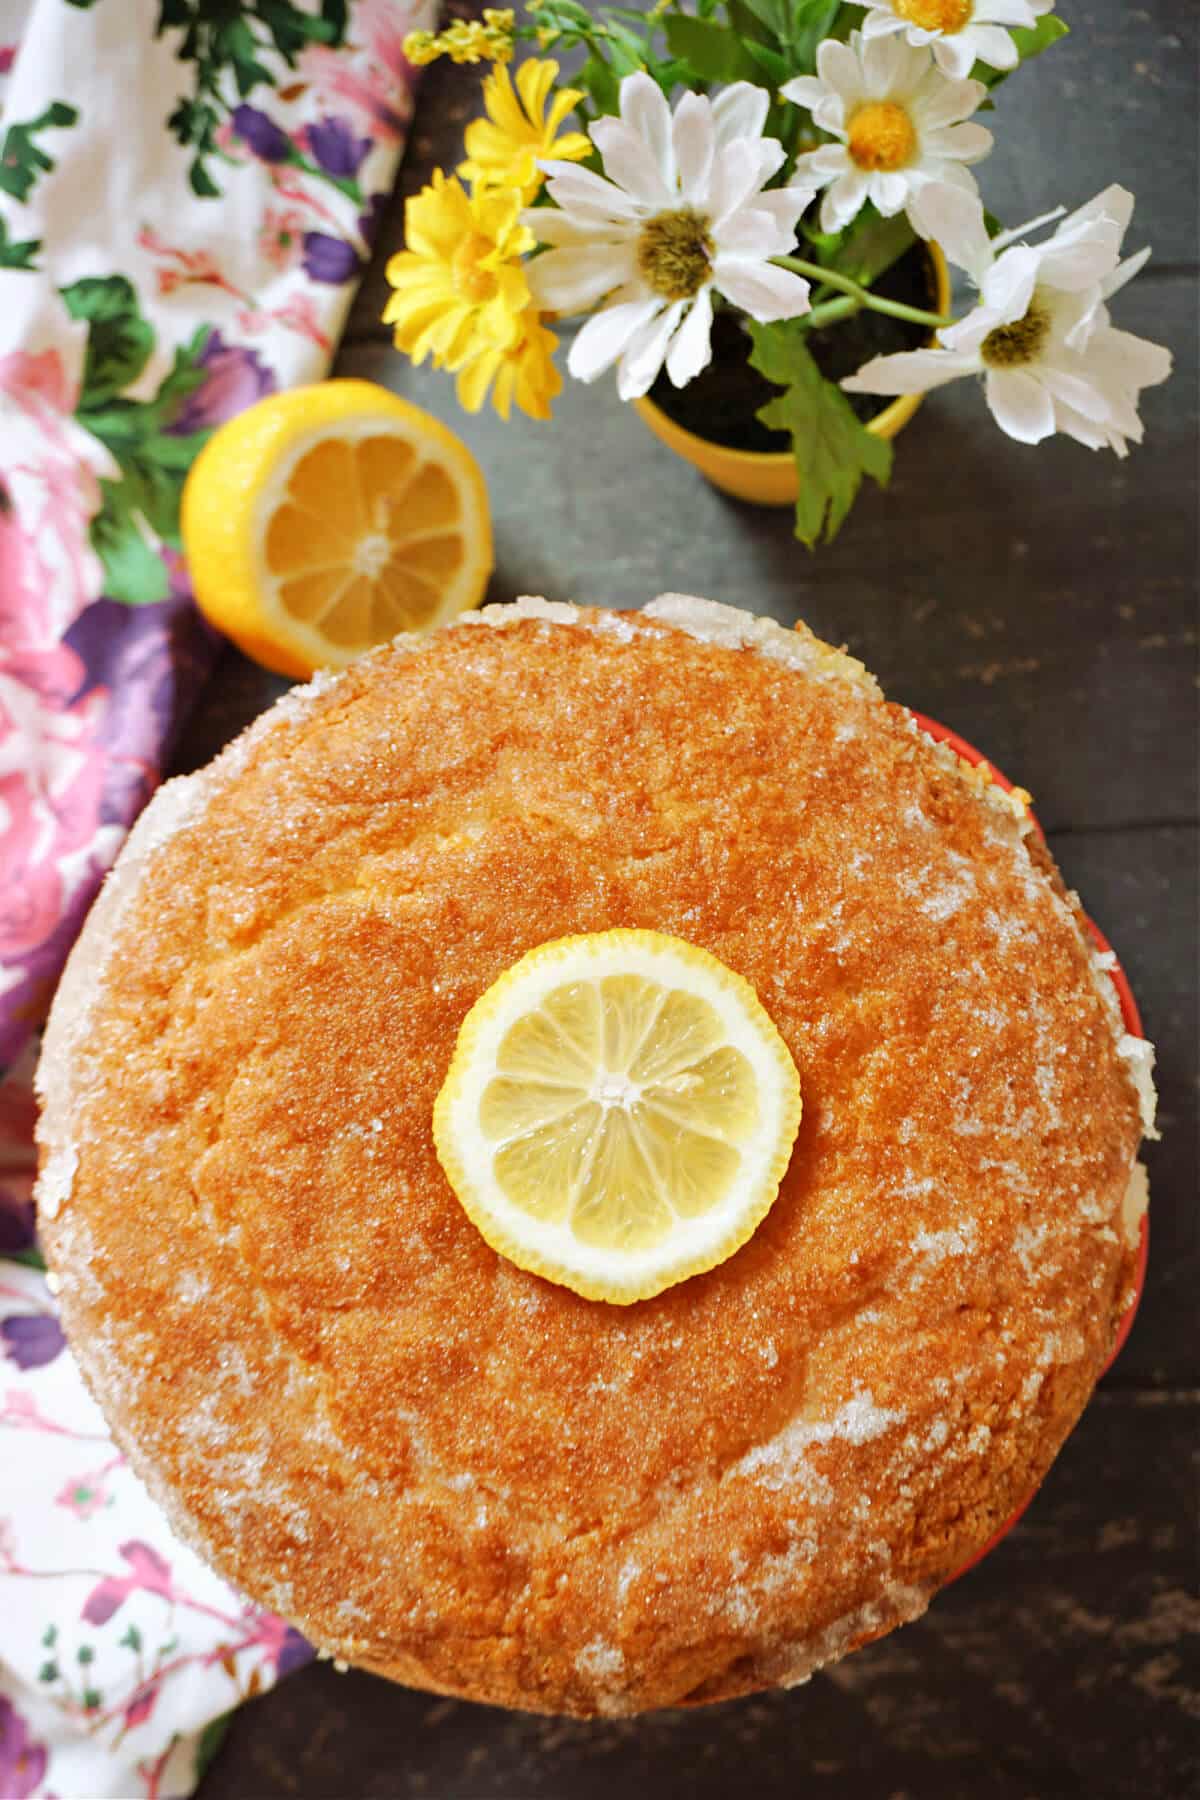 Overhead shoot of a cake with a lemon slice on top